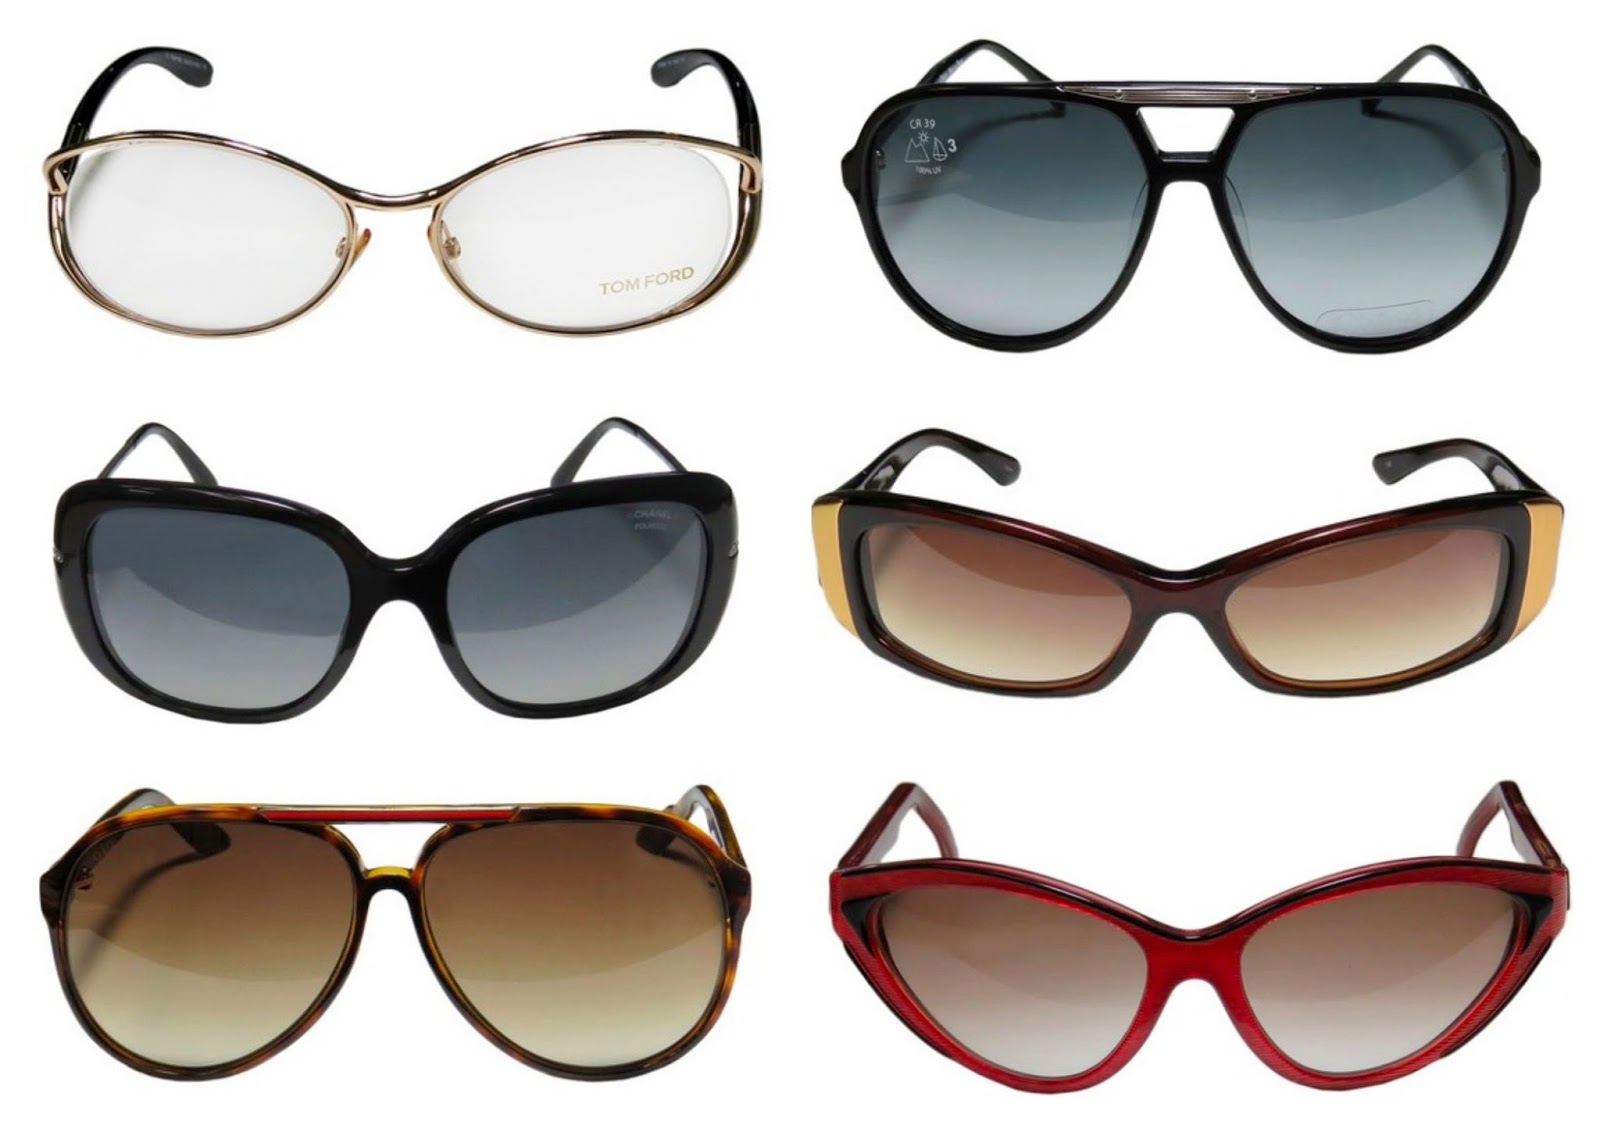 How To Choose The Best Glasses For You - WhatLauraLoves